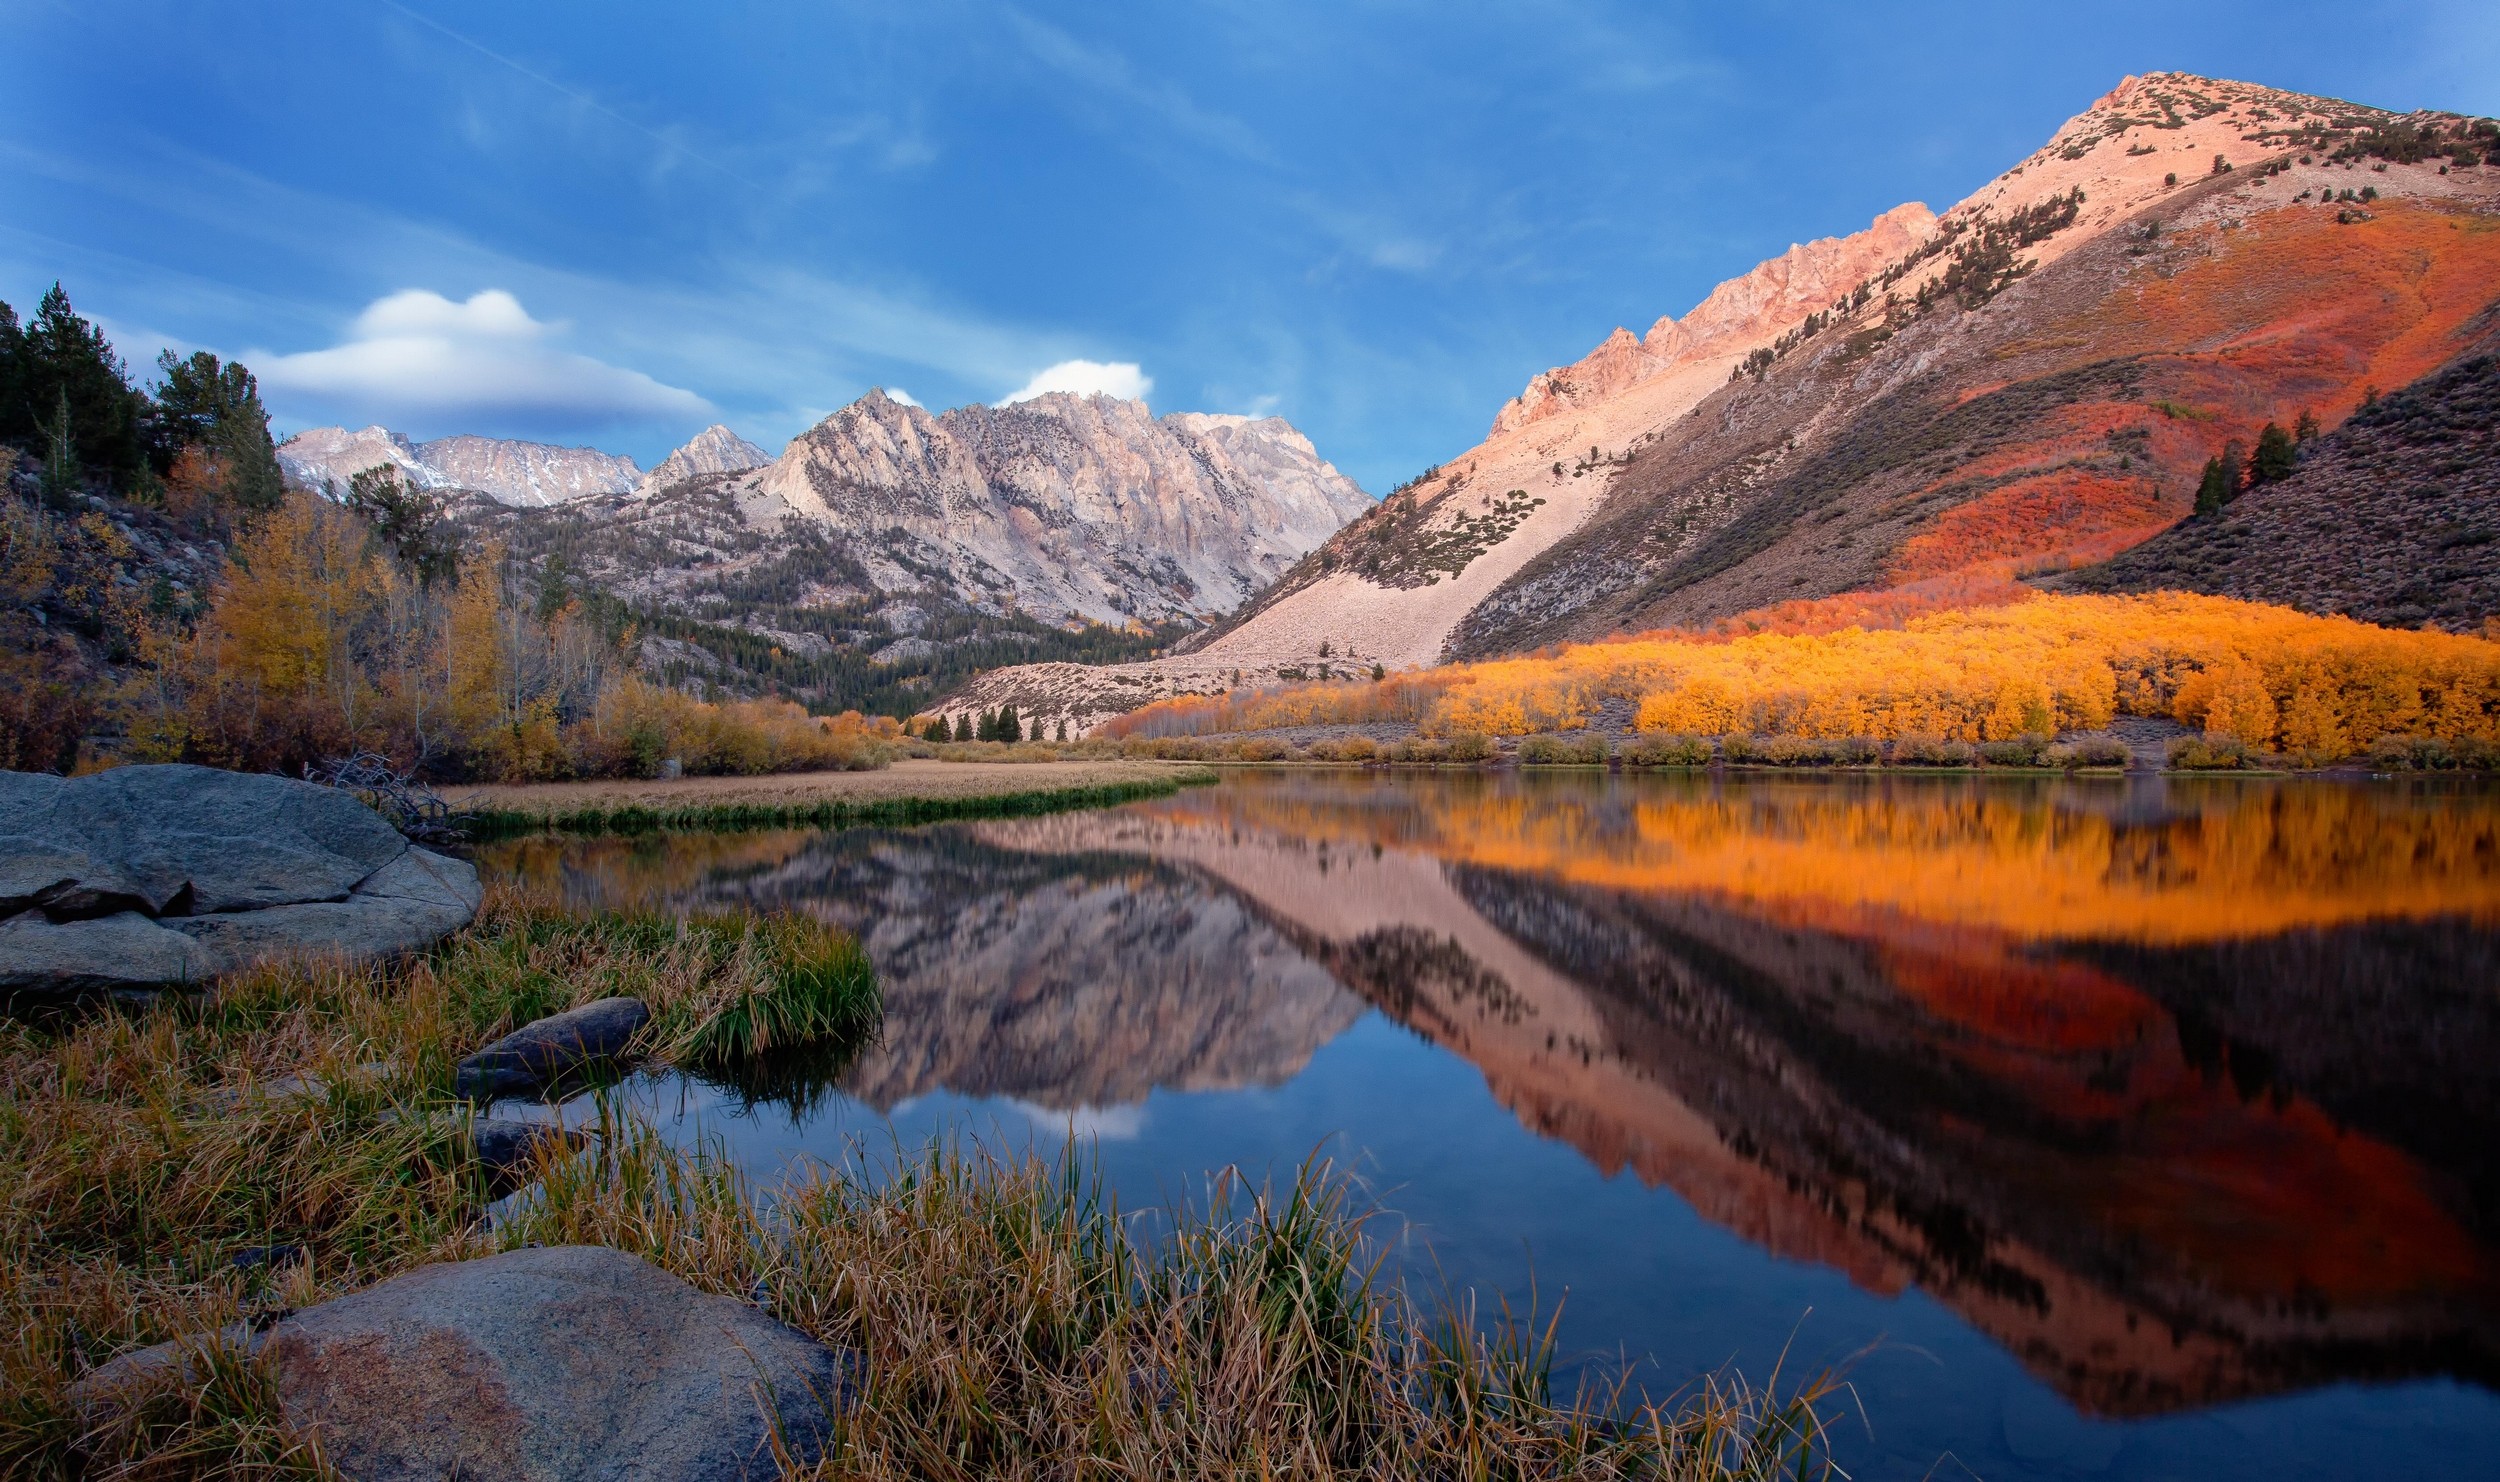 General 2500x1482 mountains lake forest reflection fall water trees grass nature landscape